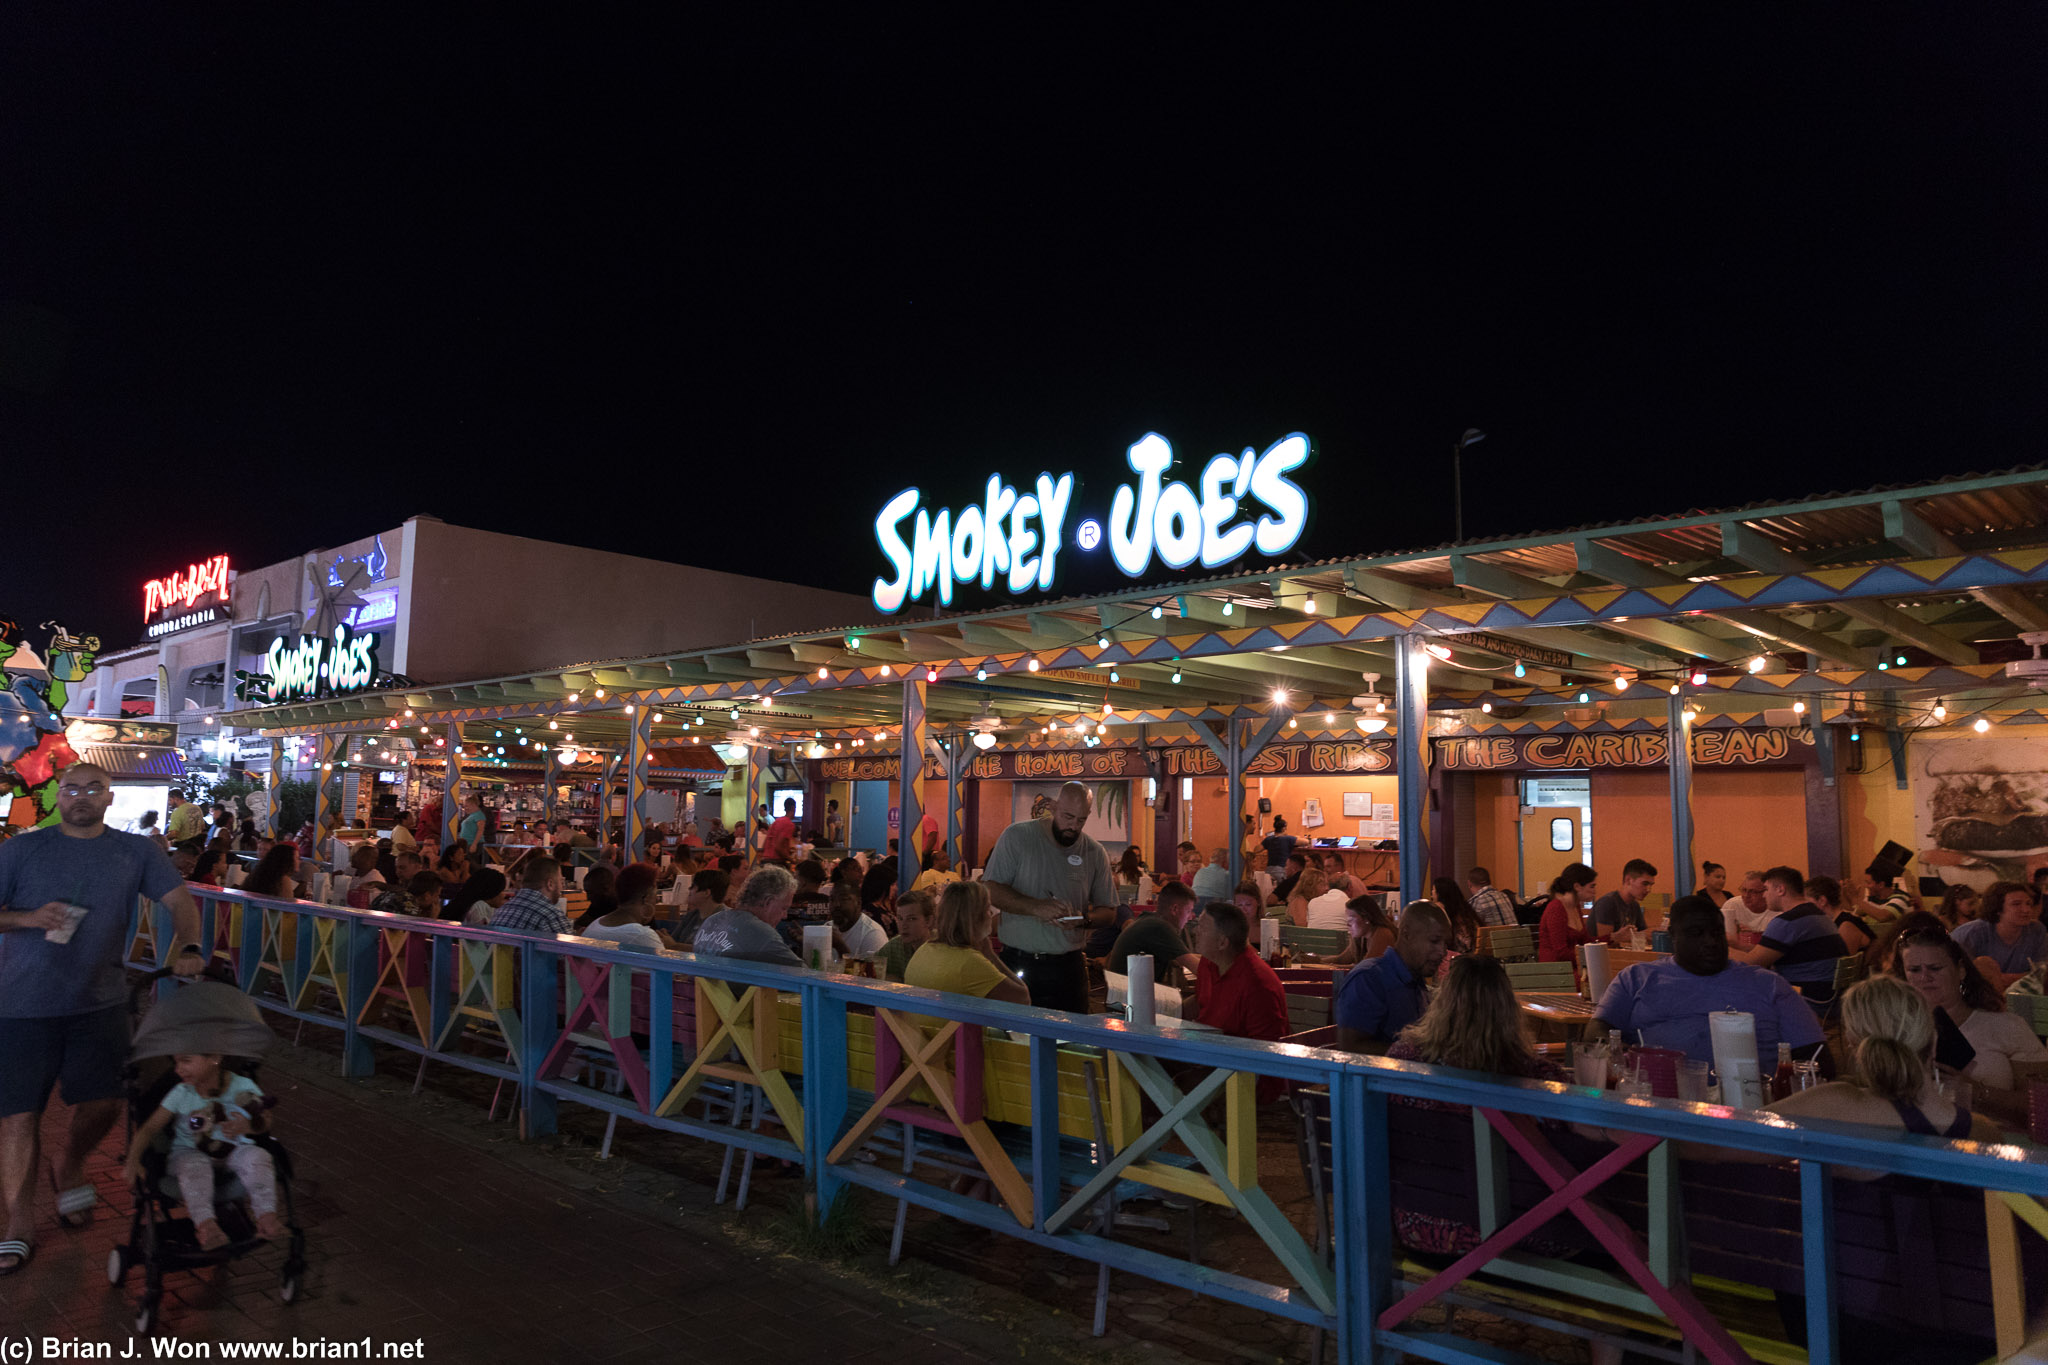 Smokey Joe's was packed. Probably should've gone here if I was going to be stuck with tourist traps?